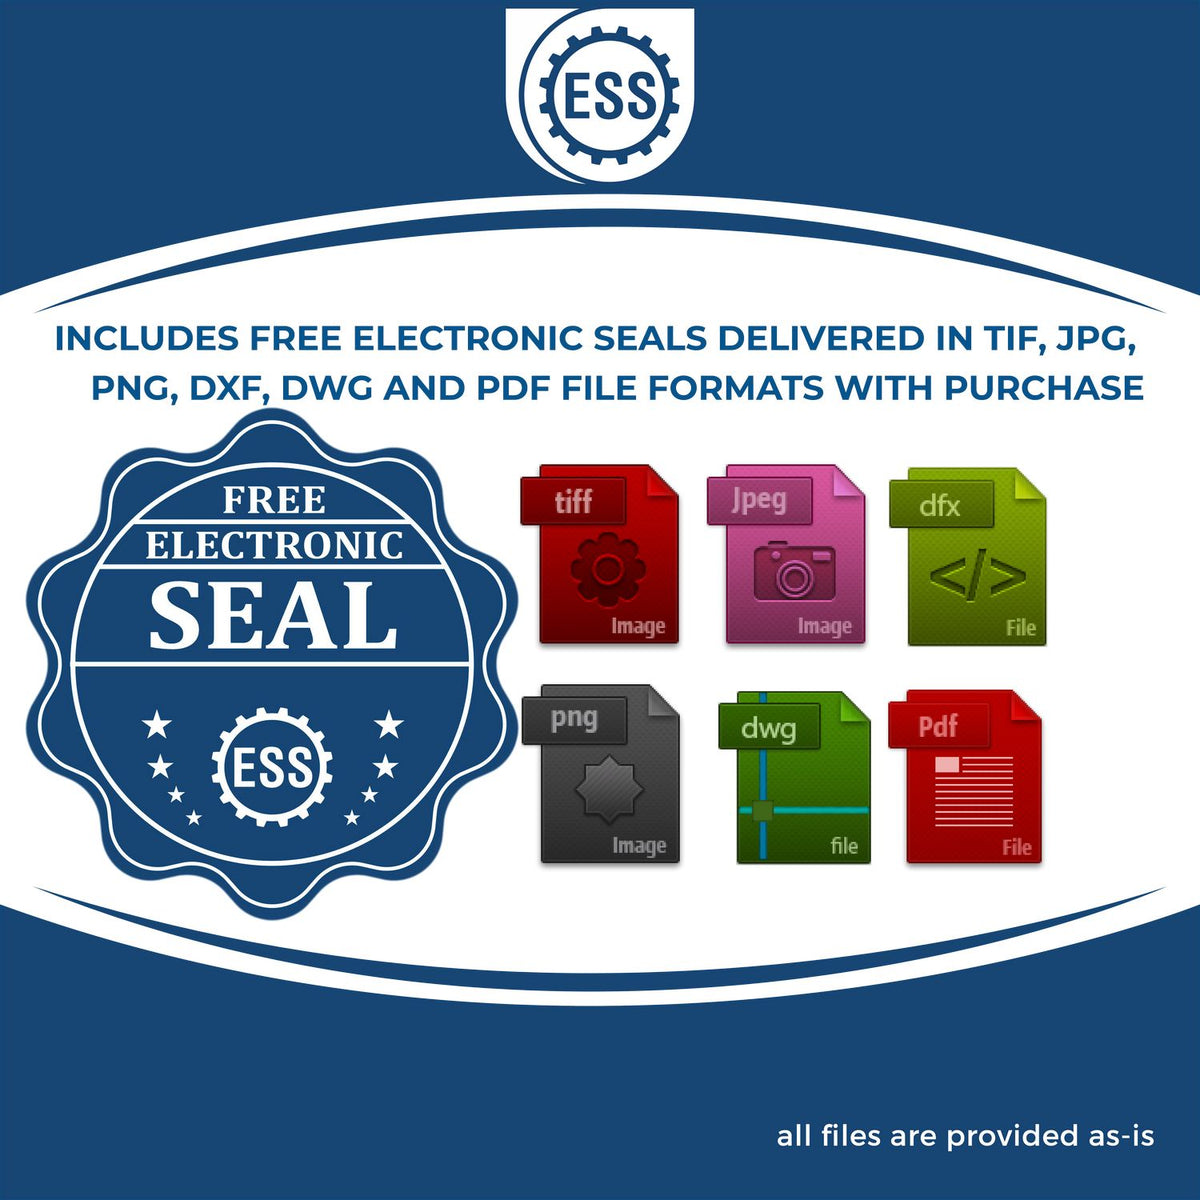 An infographic for the free electronic seal for the Self-Inking State Seal Minnesota Notary Stamp illustrating the different file type icons such as DXF, DWG, TIF, JPG and PNG.